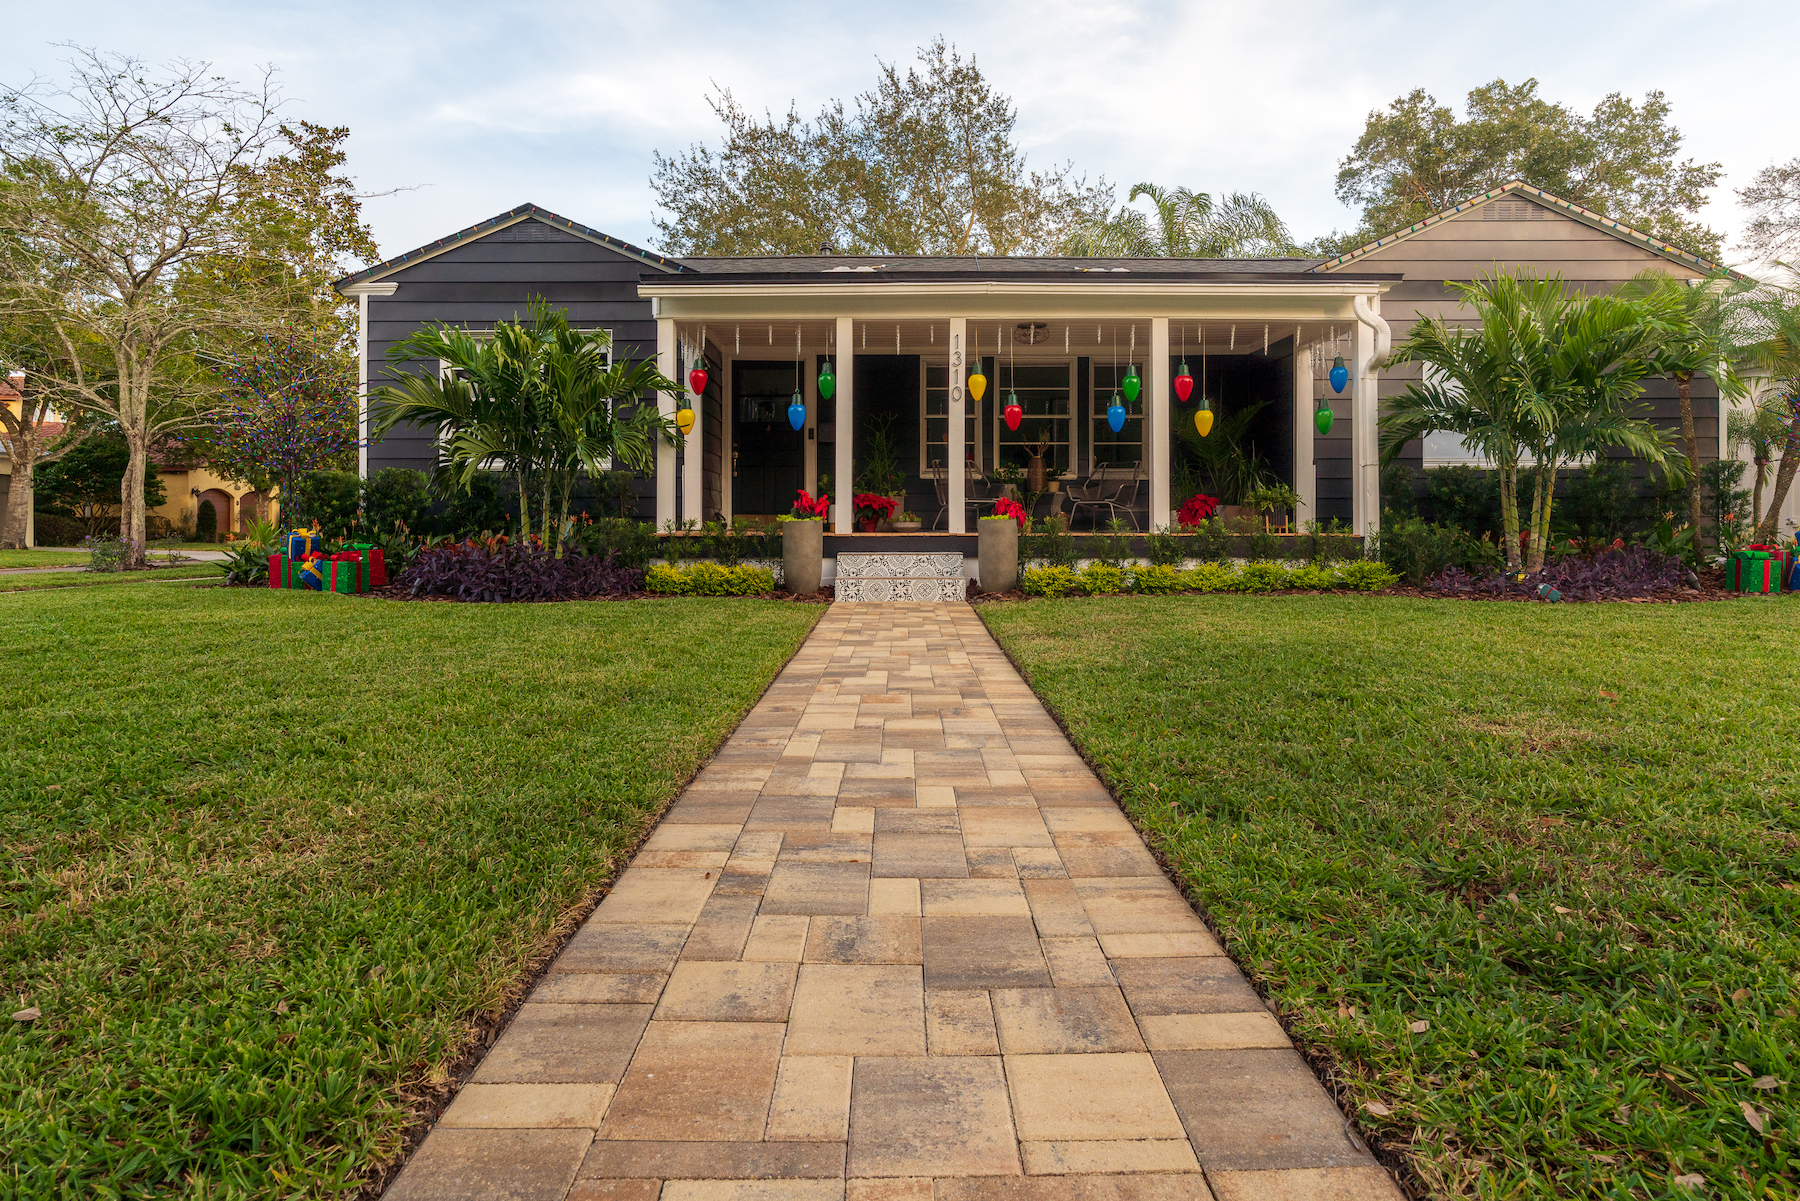 Paver walkway in front of house